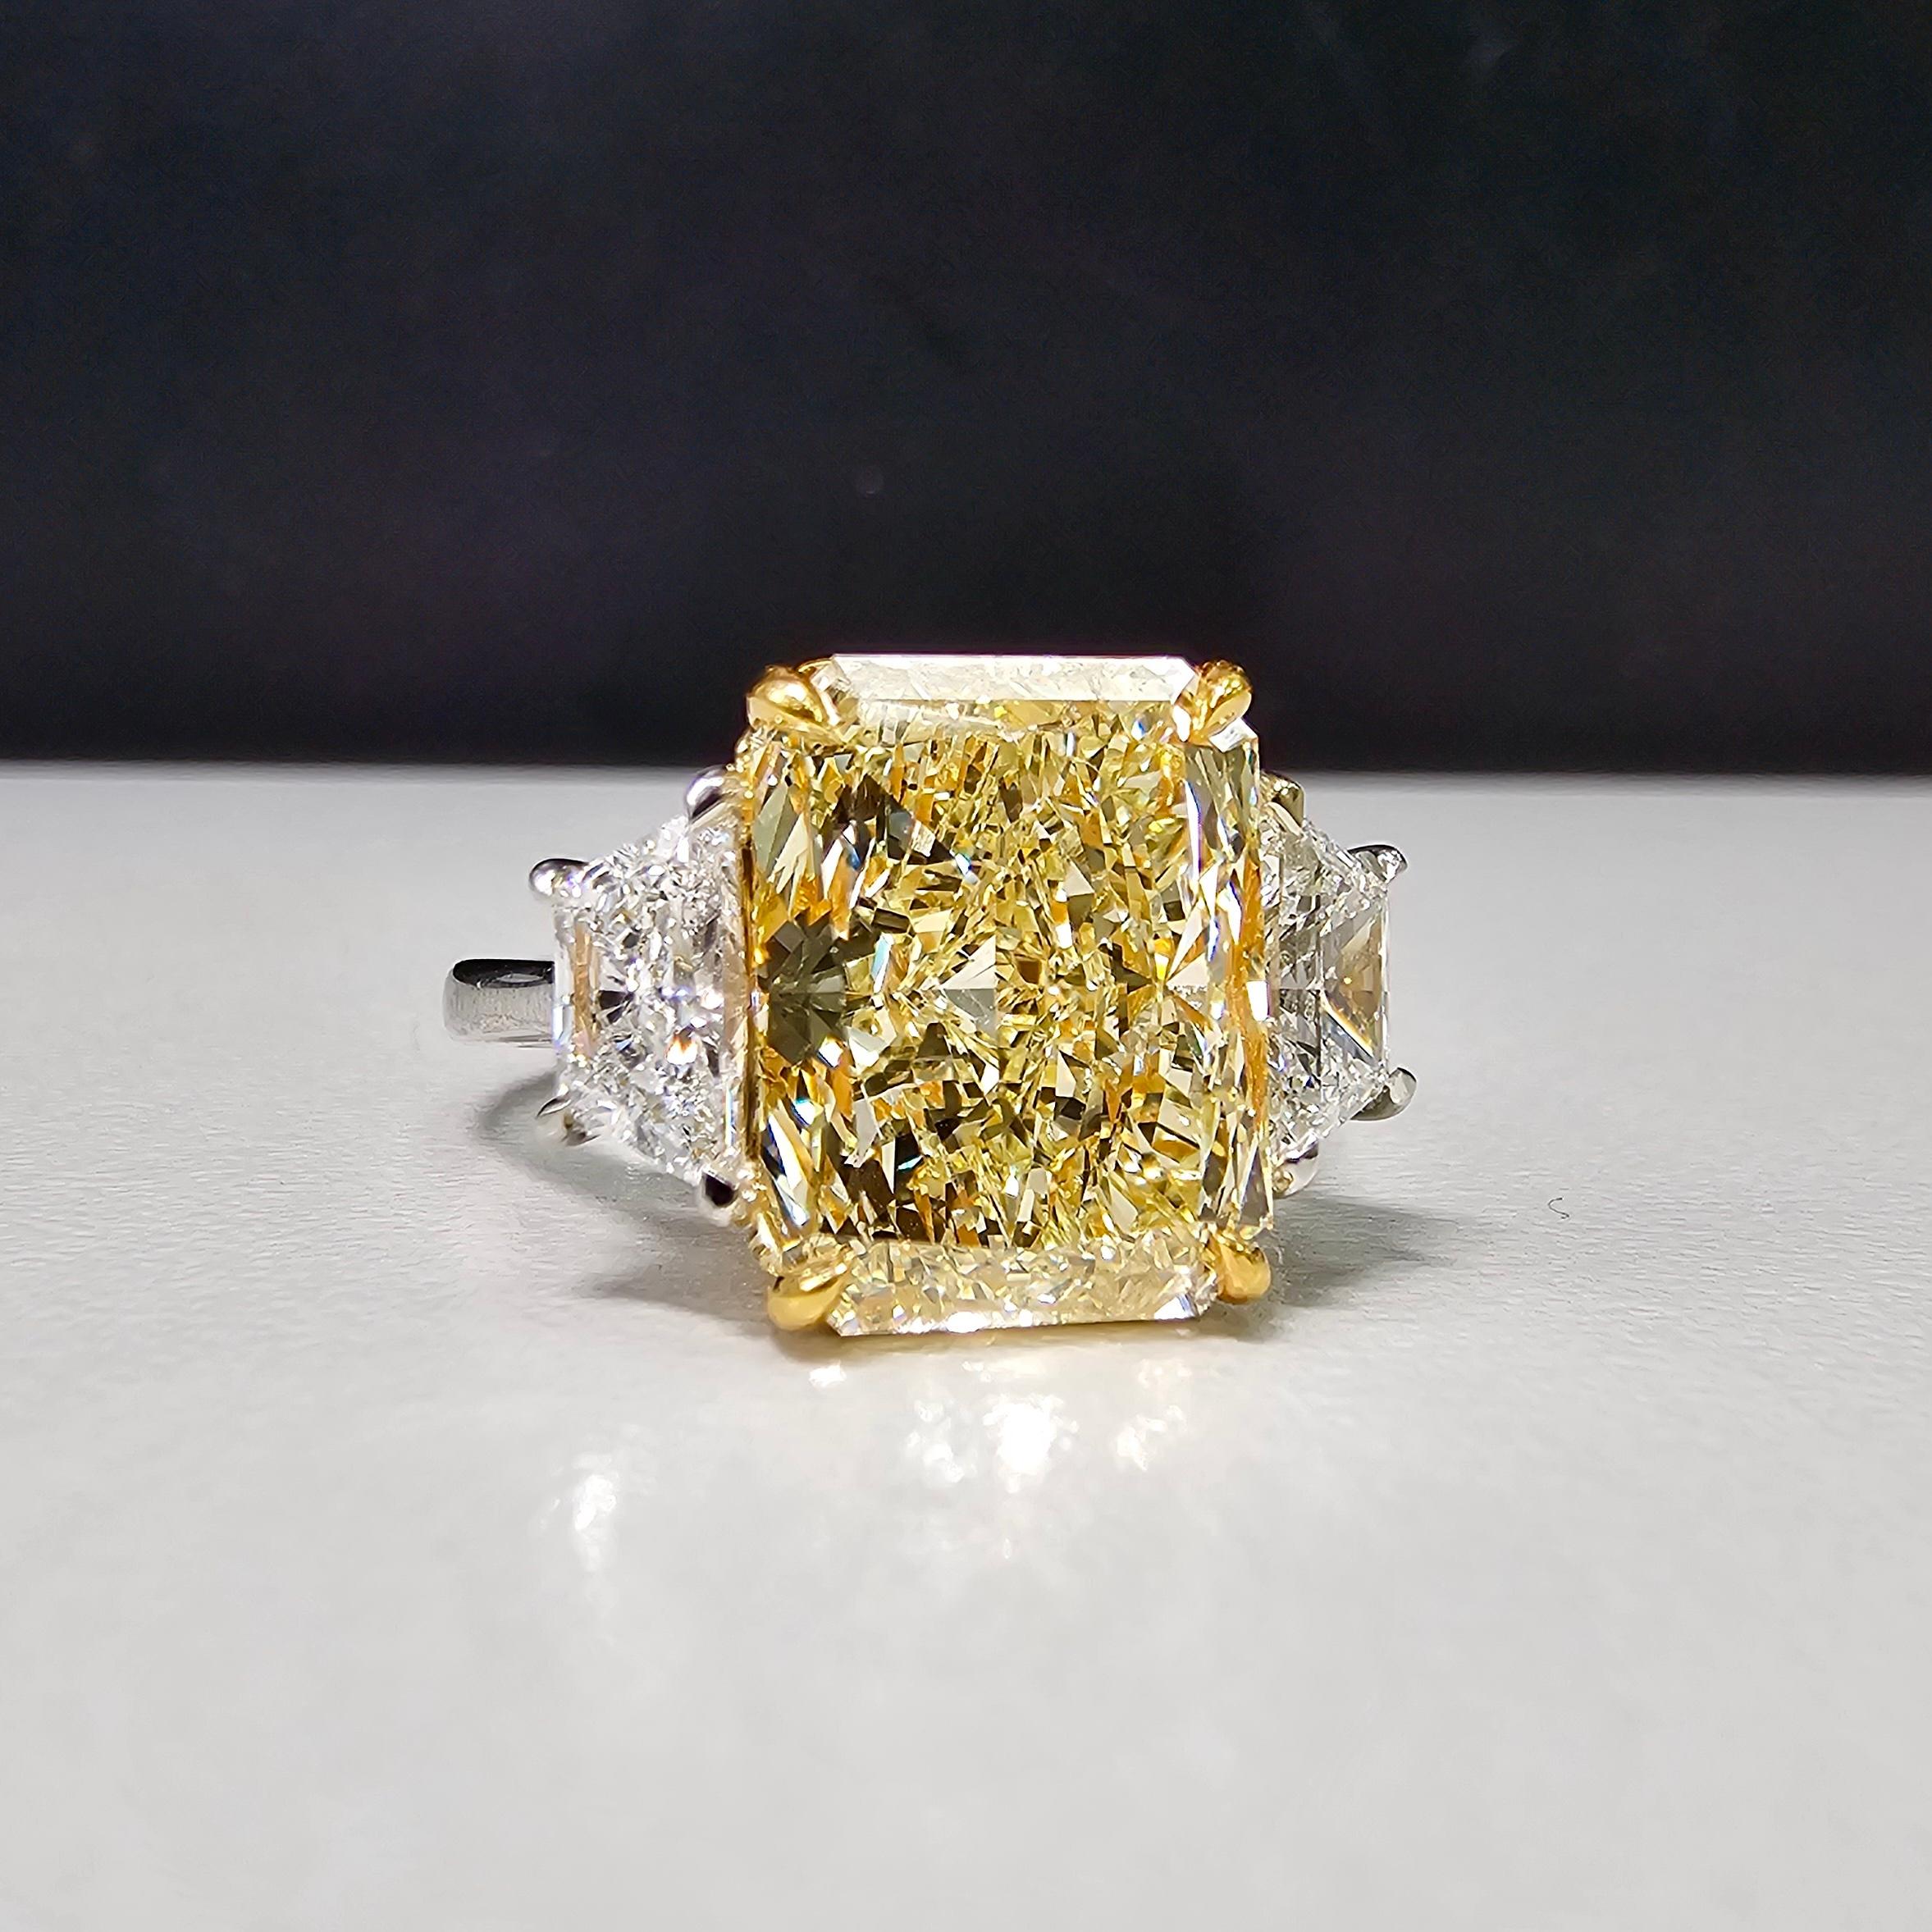 6.27 Total Carat Weight
5.34 Carat Fancy Light Yellow Elongated Radiant Cut Center Diamond
0.93 Carats of White (D) Trapezoids
VS2 Clarity
GIA Certified Diamond
Crafted in Platinum and 18k Gold 
Handmade in NYC 

This piece can be viewed before